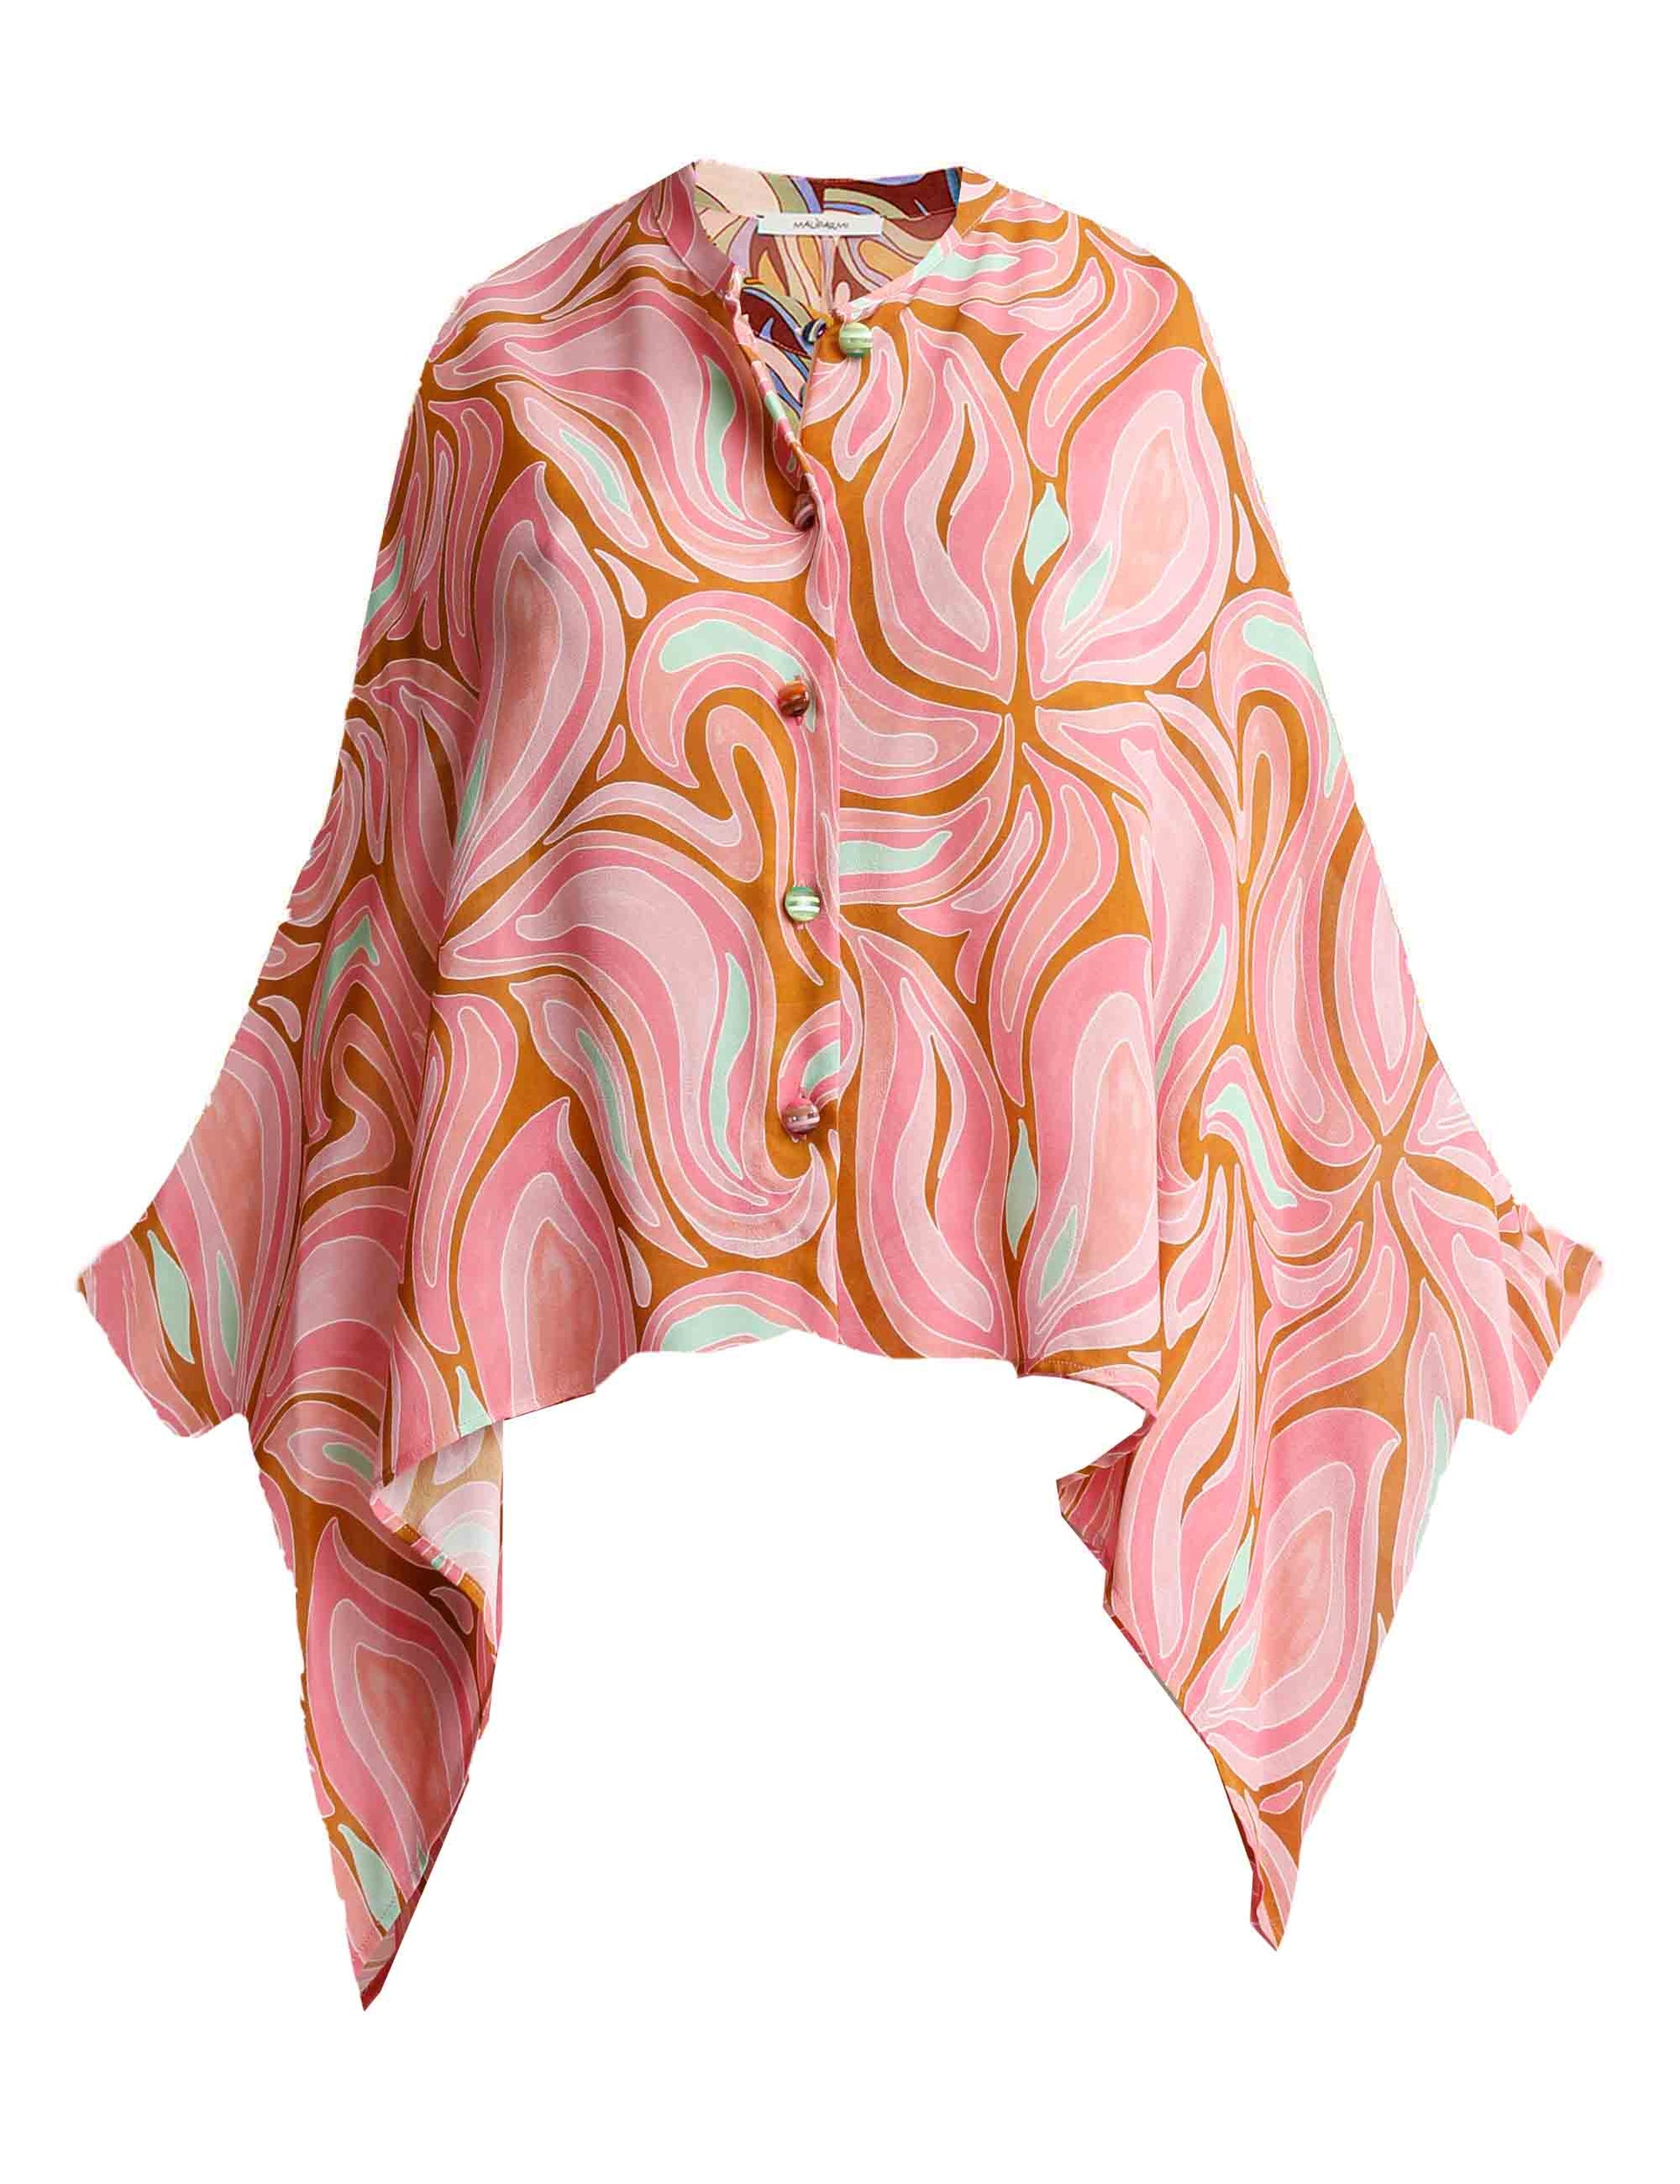 Marble Georgette women's shirts in printed natural pink viscose